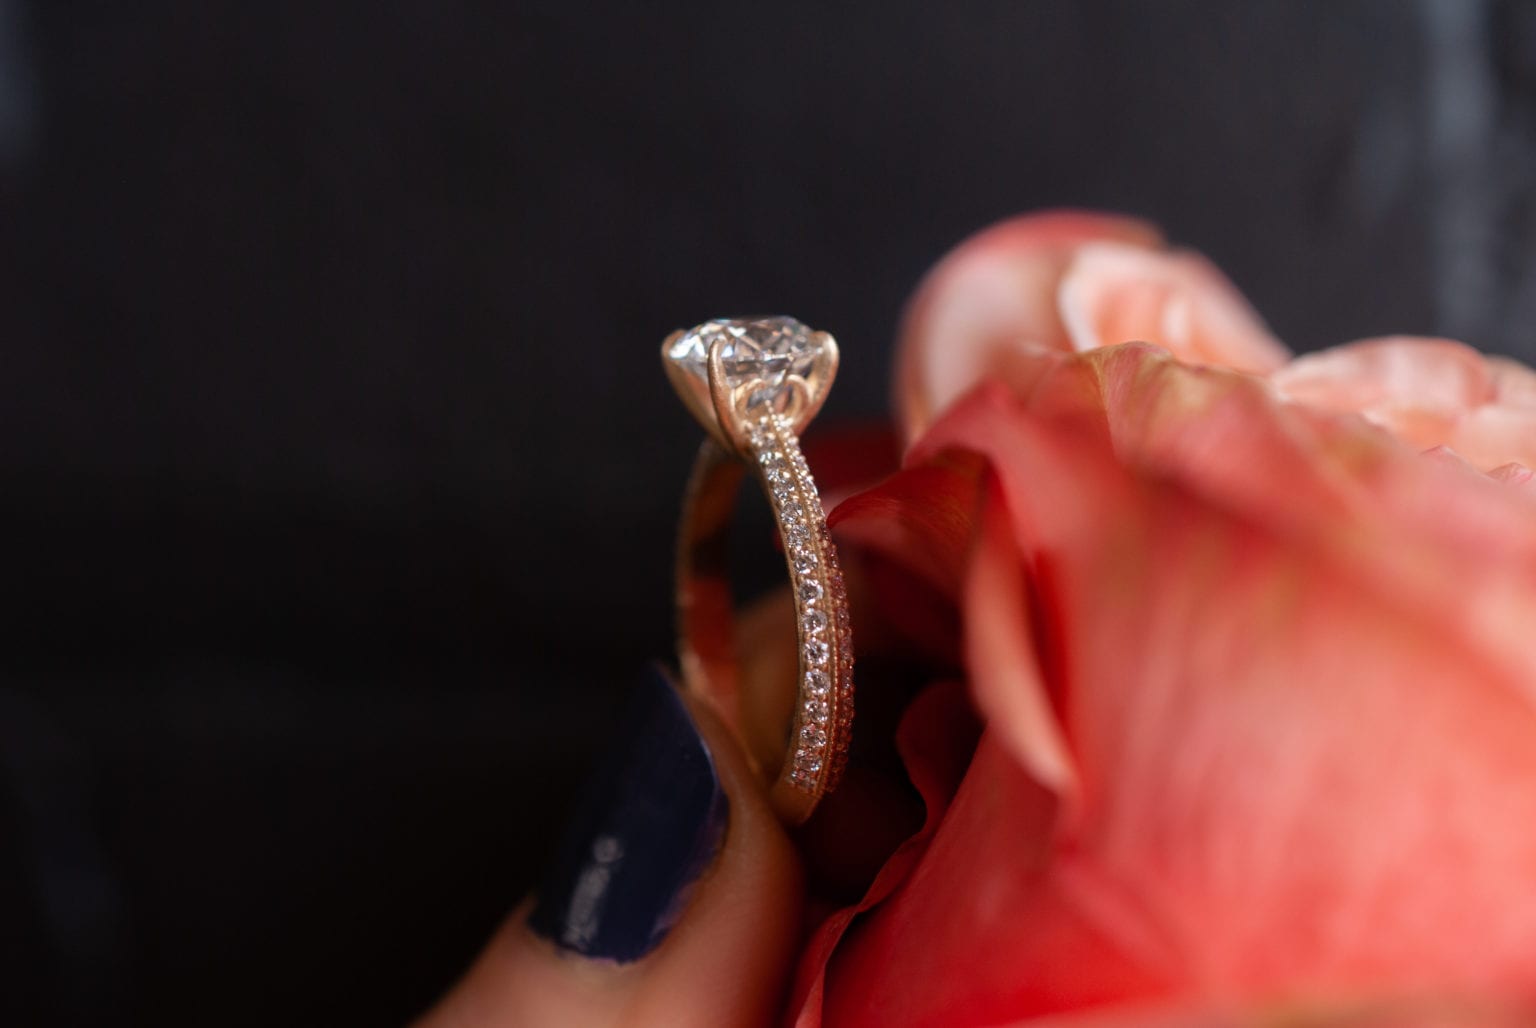 How Did Diamond Rings Become so Popular?